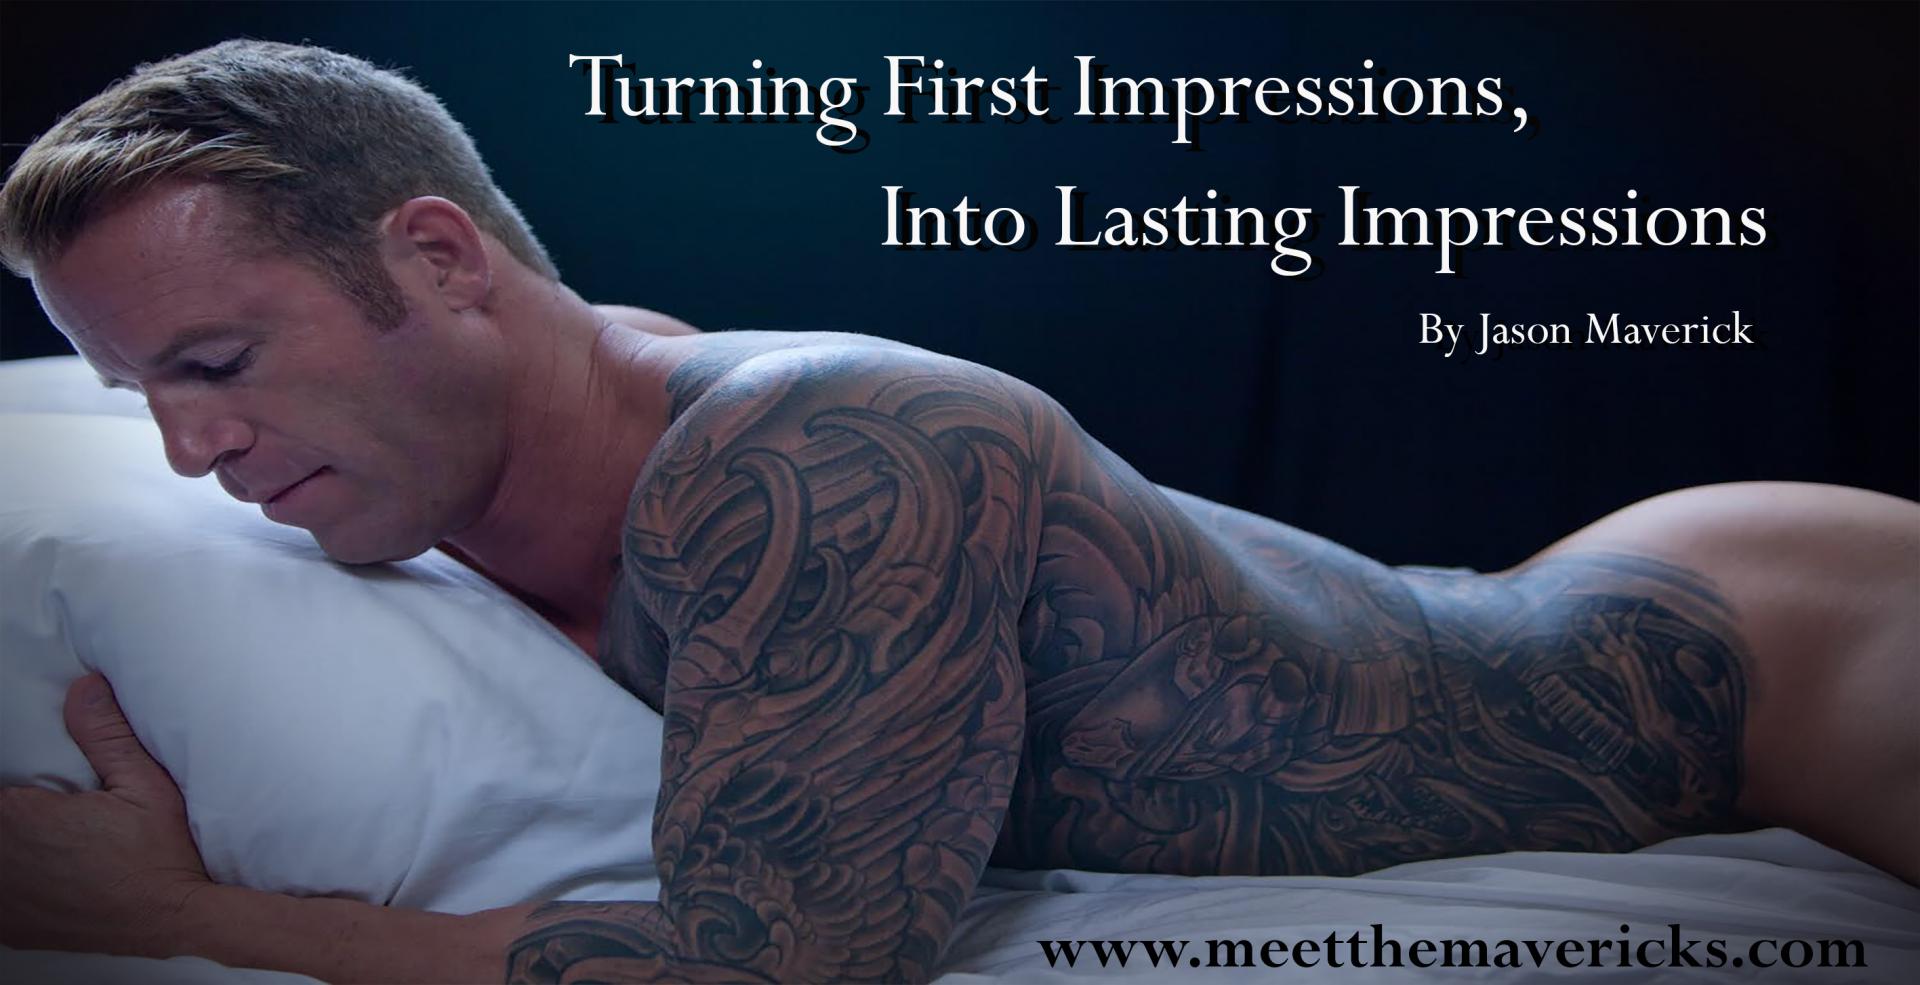 Turning First Impressions into Lasting Impressions